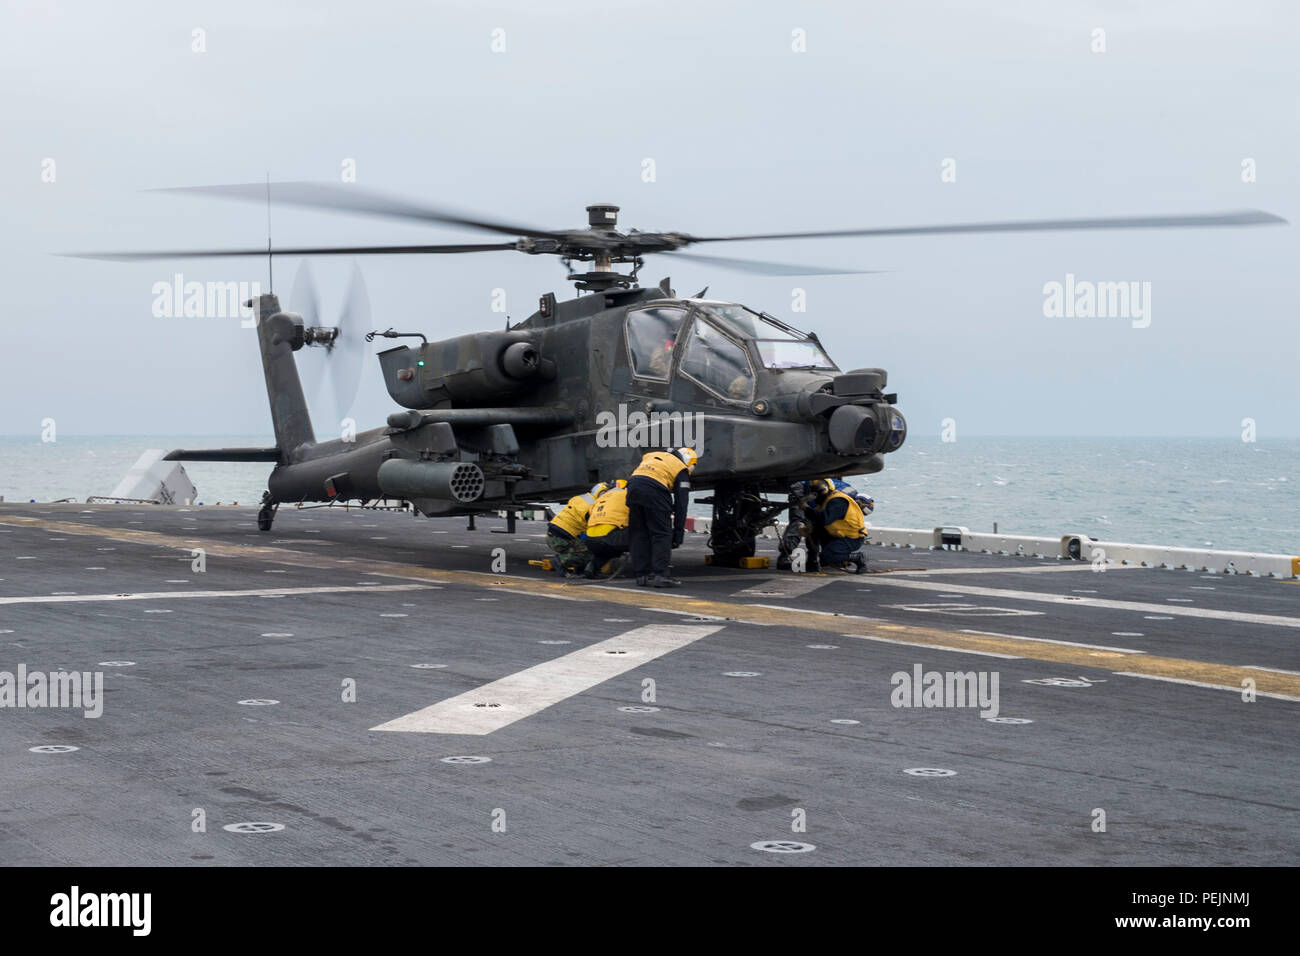 151206-N-ZZ999-037 ARABIAN GULF (Dec. 6, 2015) Sailors chock and chain an U.S. Army AH-64D Apache helicopter of the 185th Theater Aviation Brigade (TAB), Task Force Pale Riders, to the flight deck of the amphibious assault ship USS Kearsarge (LHD 3). Kearsarge is the flagship for the Kearsarge Amphibious Ready Group (ARG) and, with the embarked 26th Marine Expeditionary Unit (MEU), is deployed in support of maritime security operations and theater security cooperation efforts in the U.S. 5th Fleet area of operations. (U.S. Navy photo by Mass Communication Specialist Seaman Apprentice Dana D. L Stock Photo